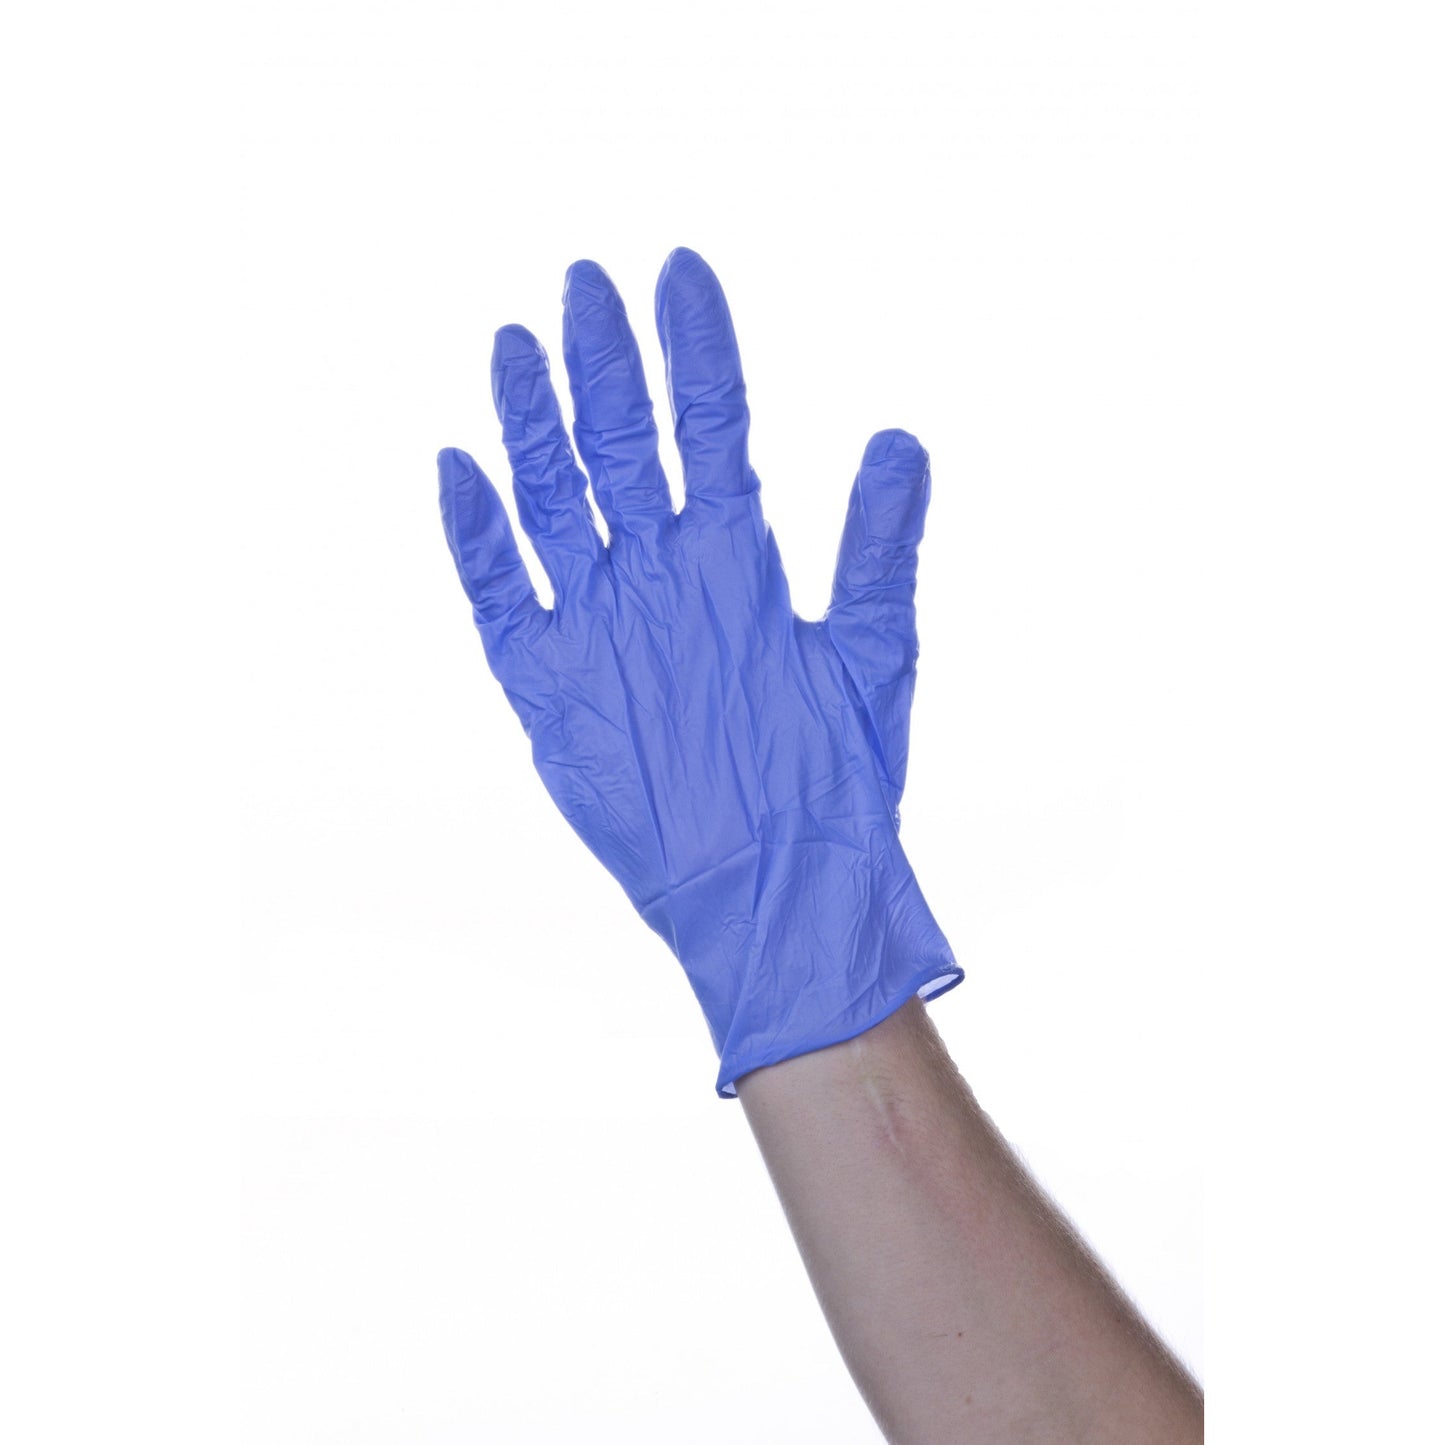 Blue Sterile Nitrile Gloves Pack of 50 - Small